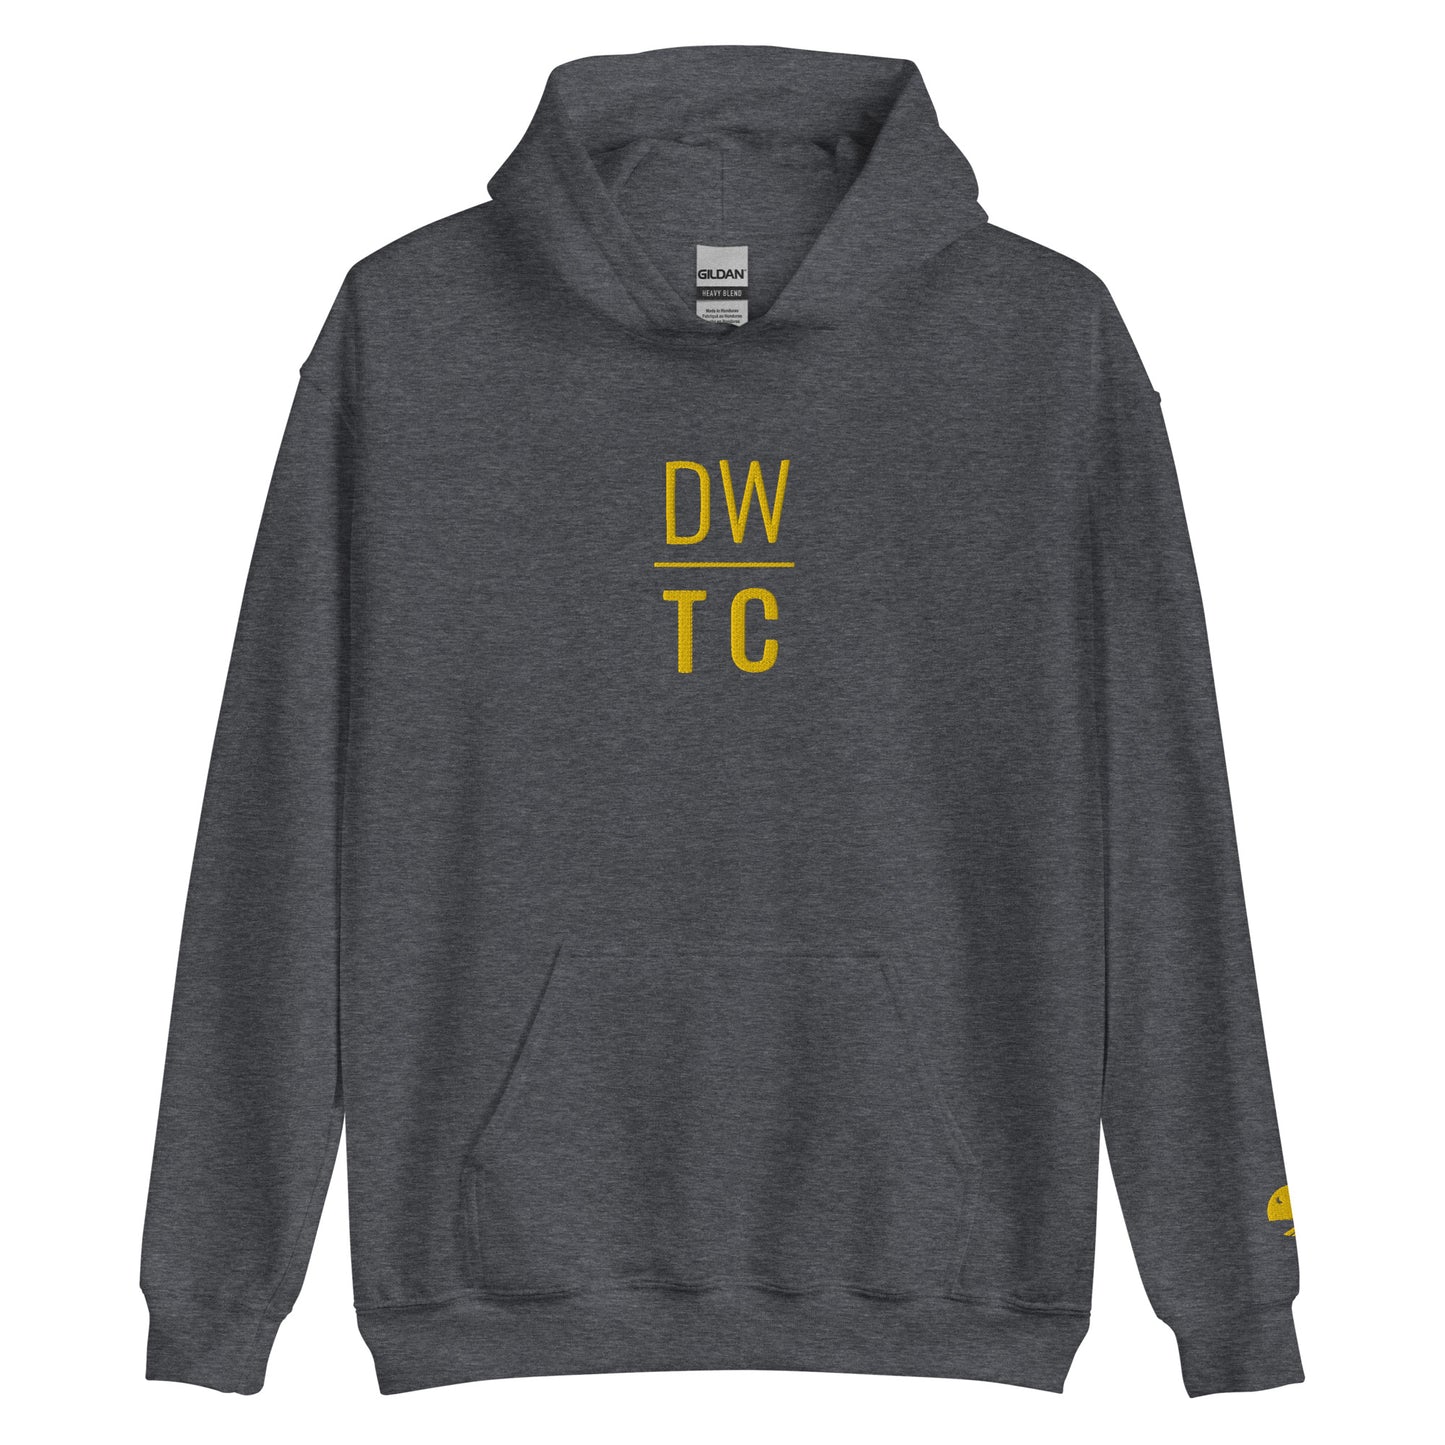 DWTC Embroidered Adult Hoodie